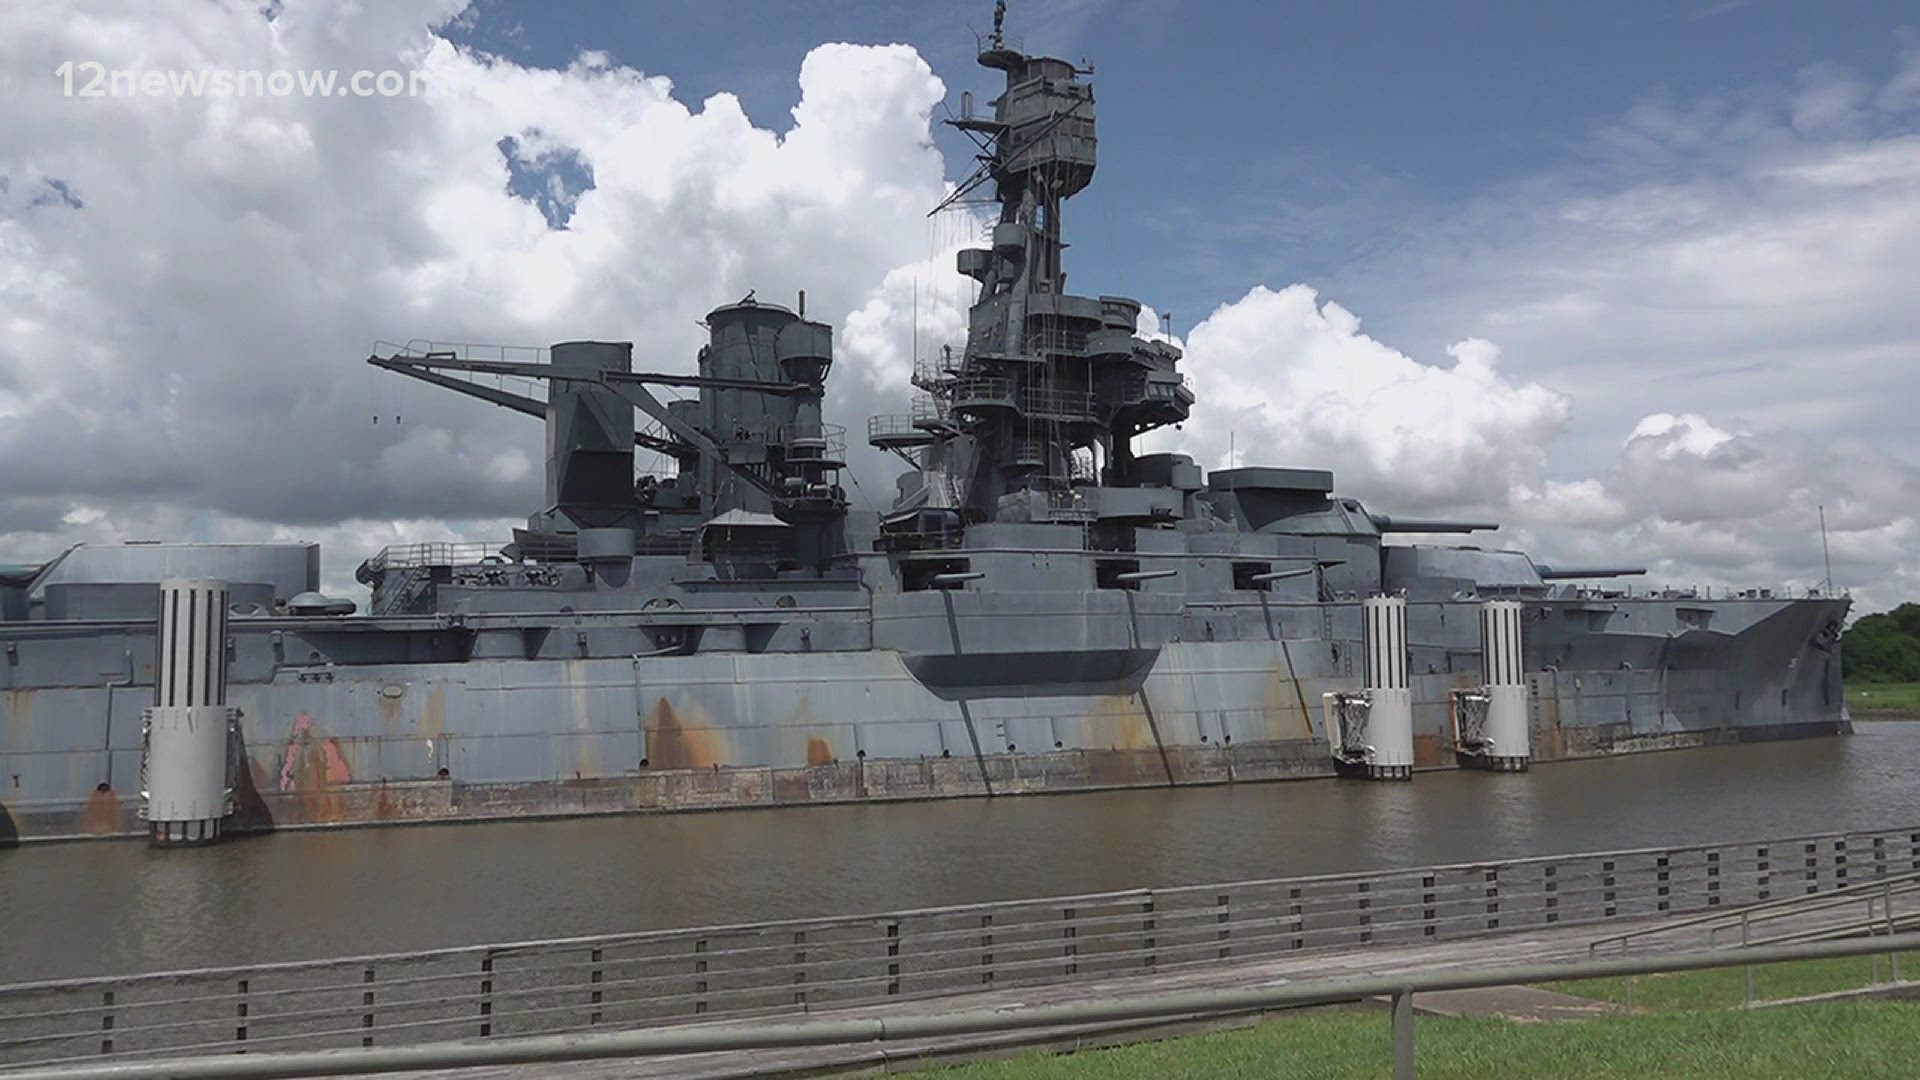 While Beaumont was late to the discussion regarding a new home for the Battleship Texas, it could have a strong case for bringing the ship to Southeast Texas.